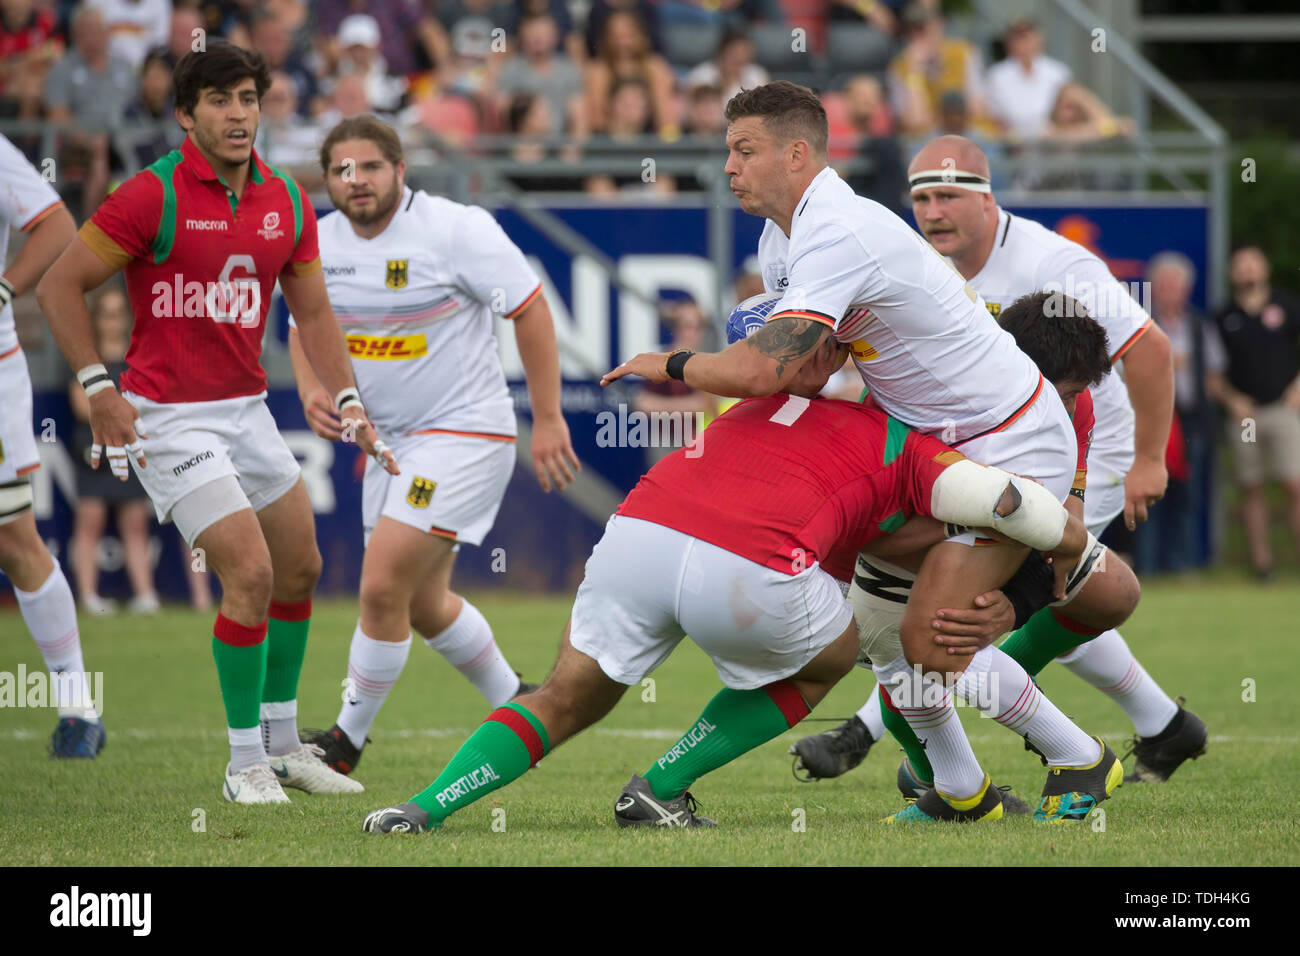 Hessen, Germany. 15th June, 2019. Rugby: EM, Relegation, Germany - Portugal. Raynor Parkinson (Germany, 10) is stopped rudely by Joao Vasco Corte-Real (Portugal, 1). Credit: dpa picture alliance/Alamy Live News Stock Photo